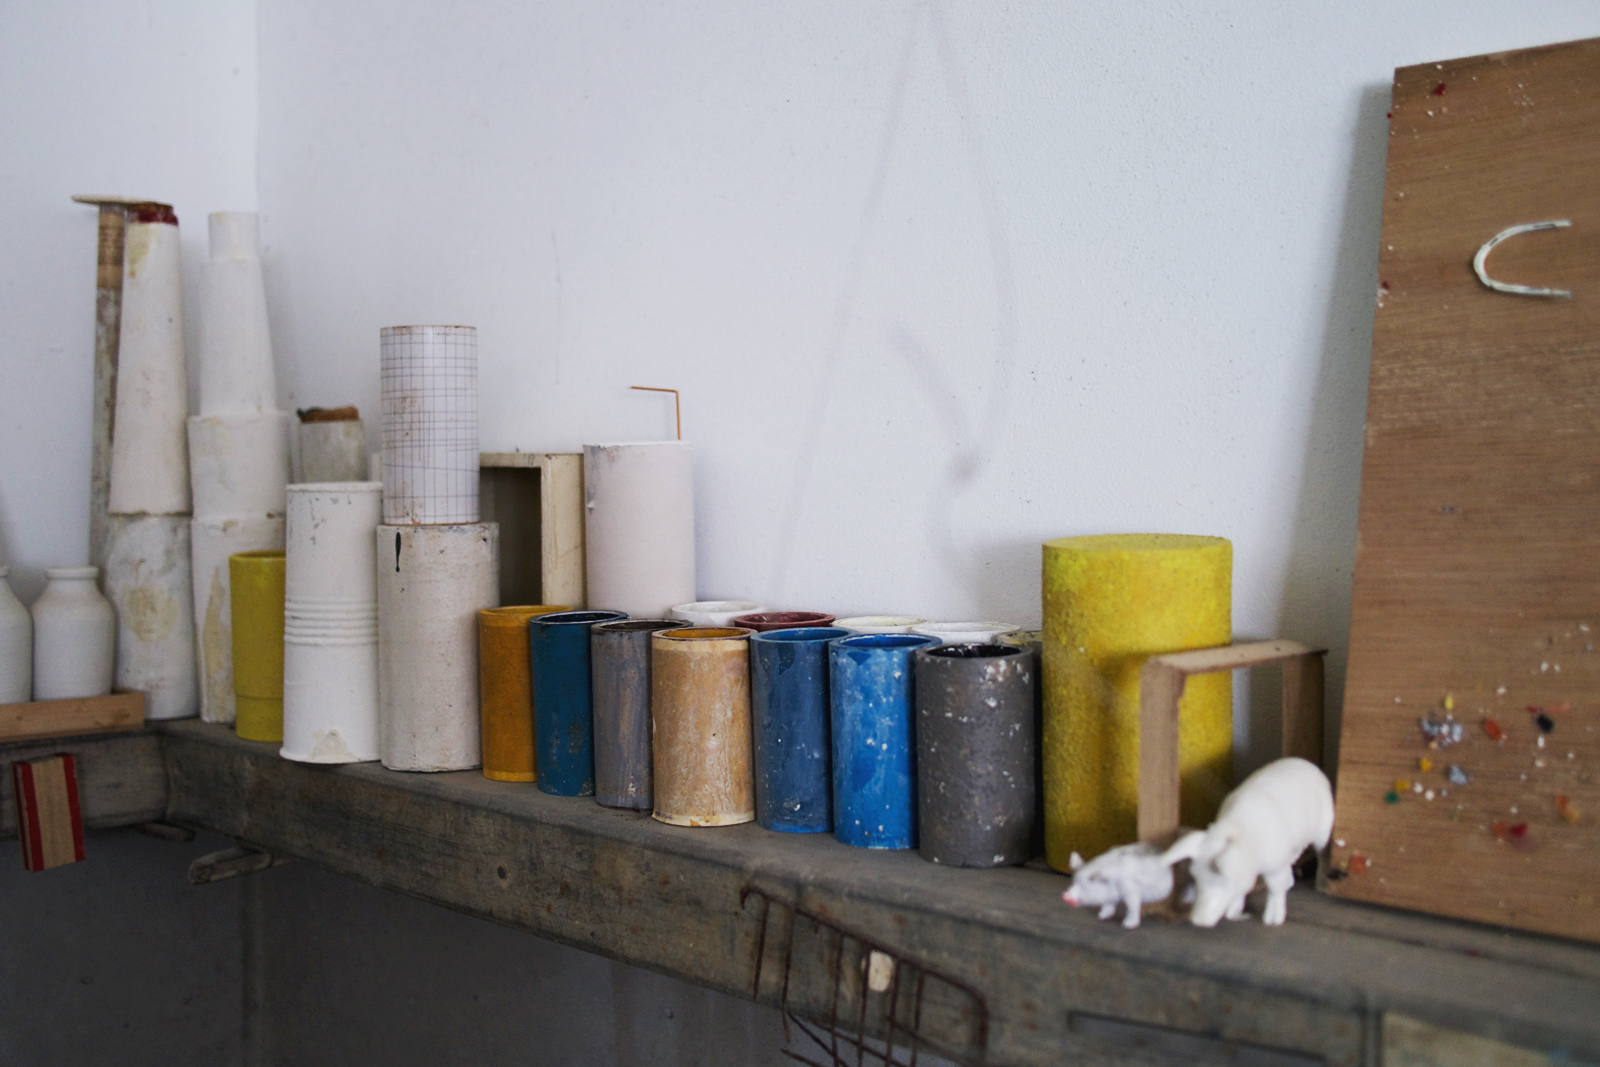 Recycled cylindrical forms in blue, gray and yellow lined on a shelf with white four legged animals blurred in foreground